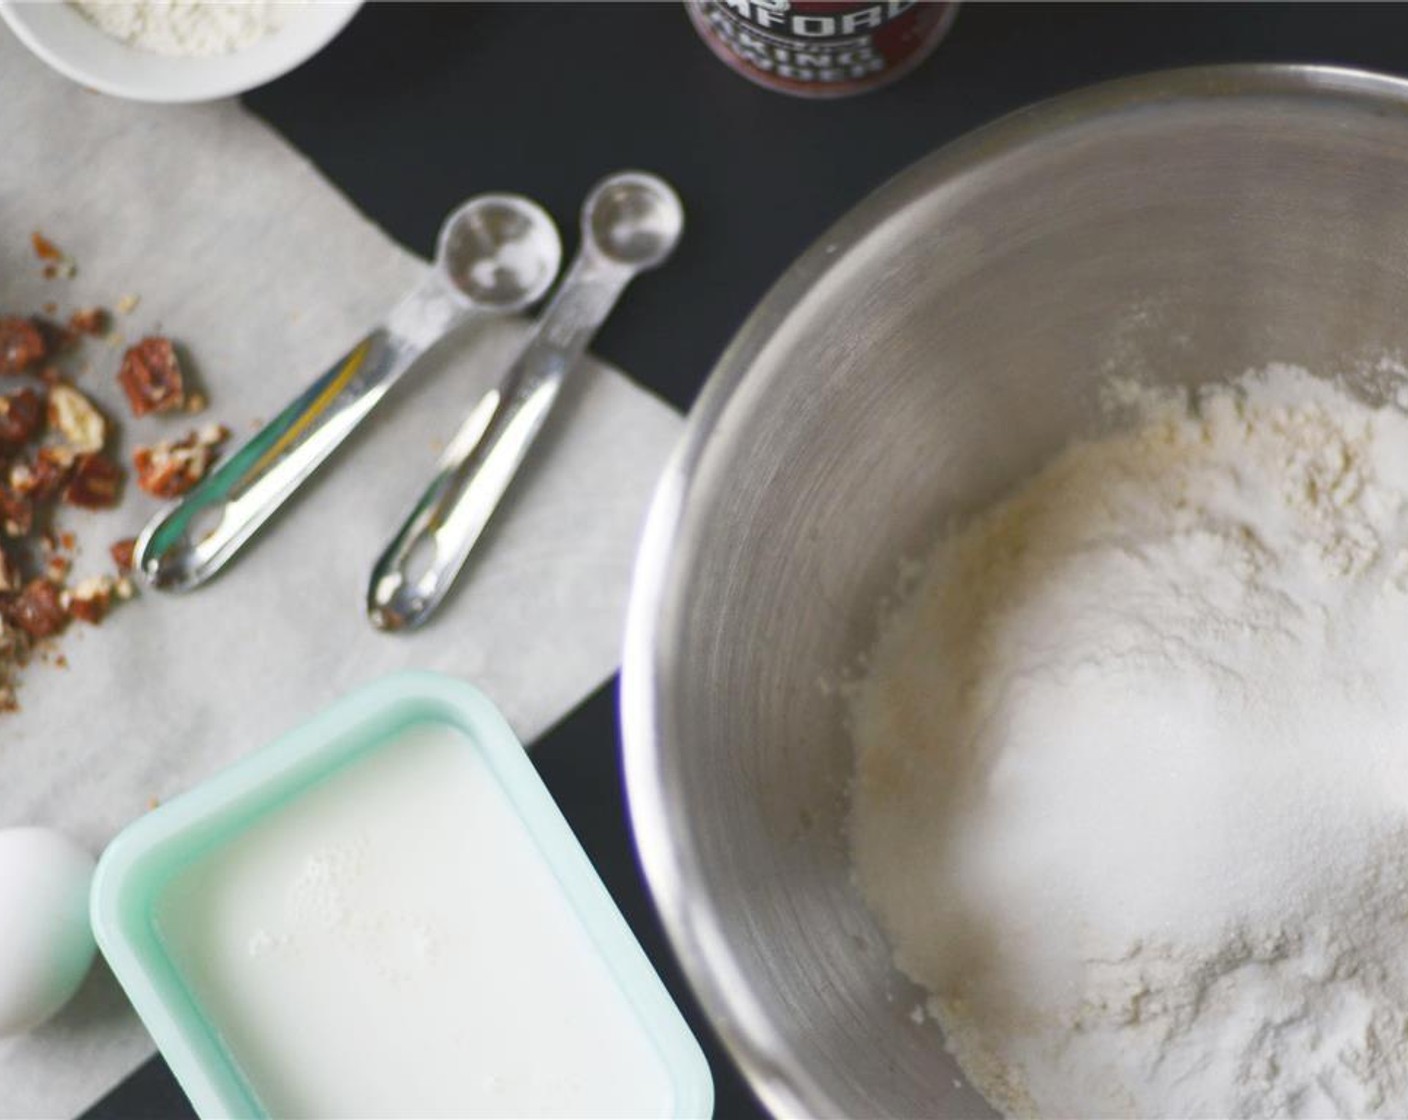 step 3 In a large mixing bowl, whisk together All-Purpose Flour (3 cups), Baking Powder (1 Tbsp), Baking Soda (1/2 tsp), Salt (1/2 tsp), and Granulated Sugar (2 Tbsp).